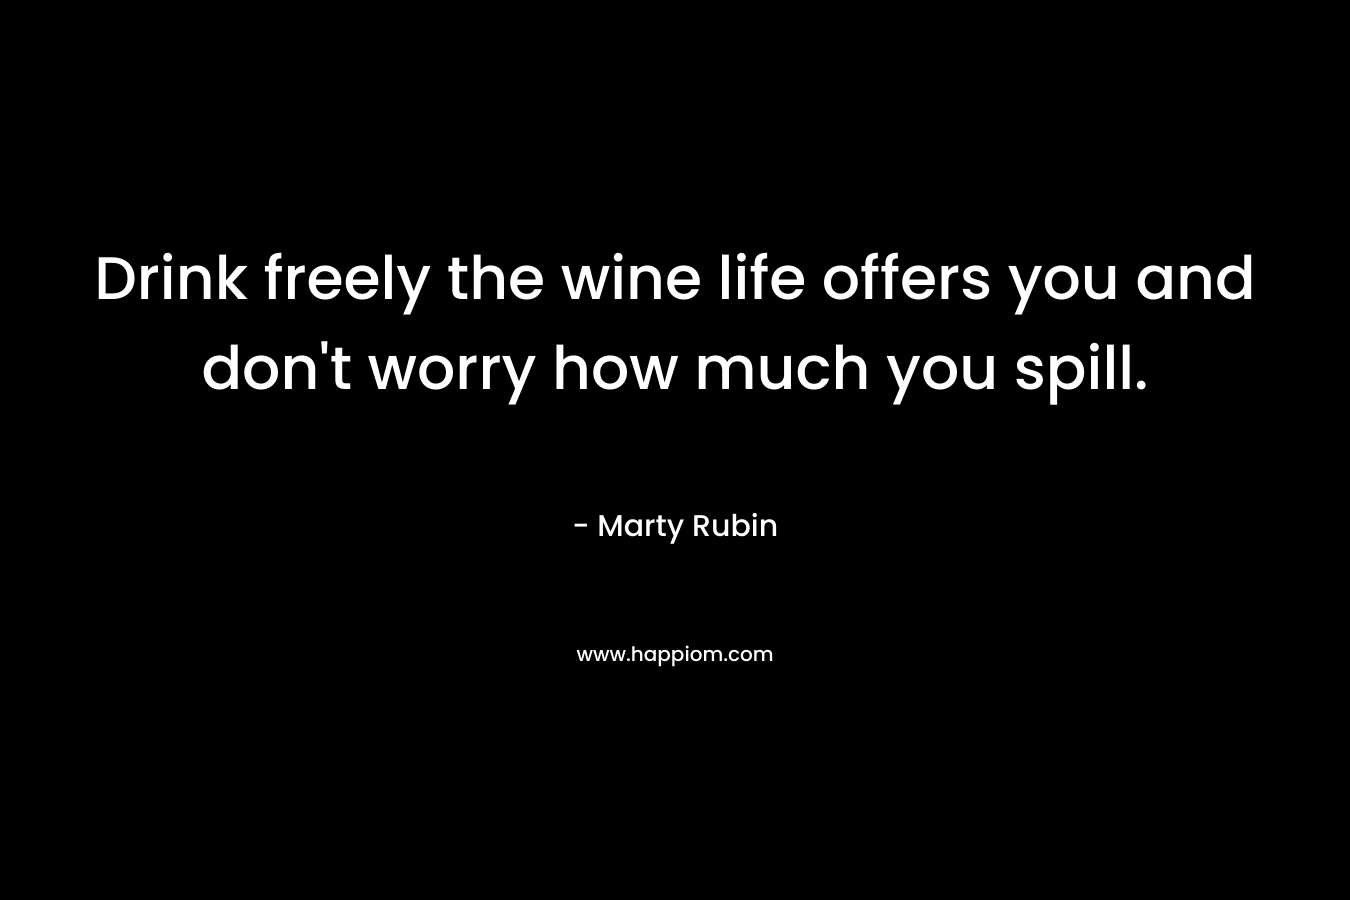 Drink freely the wine life offers you and don't worry how much you spill.